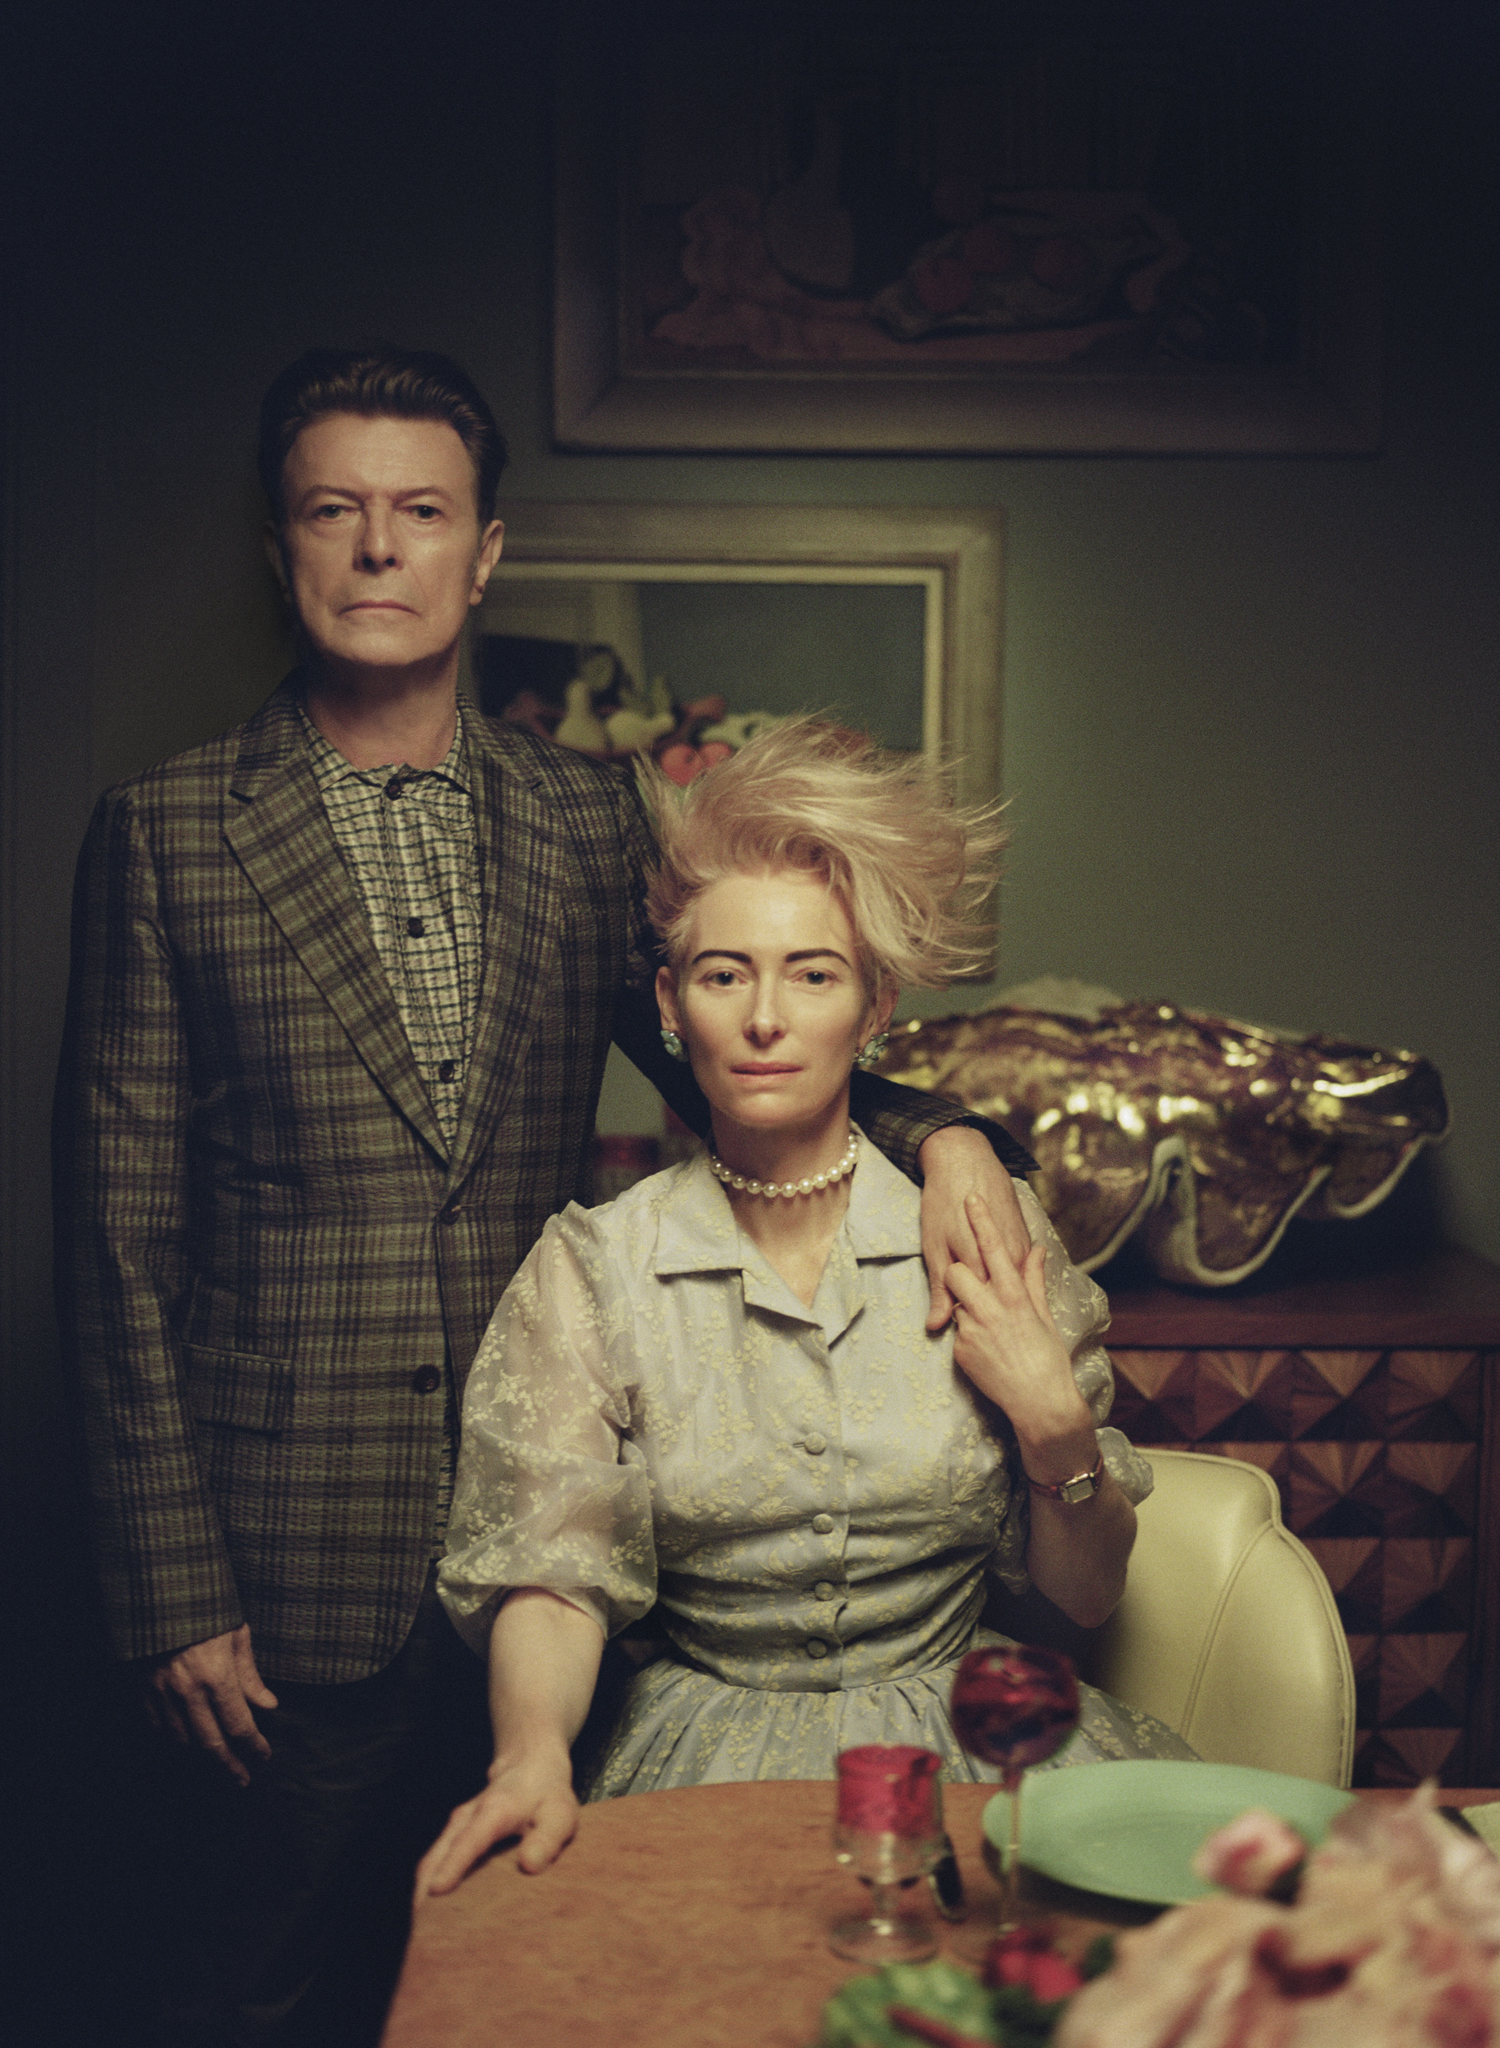 A photo taken by Director Floria Sigismondi on set of The Stars (Are Out Tonight), featuring Tilda Swinton